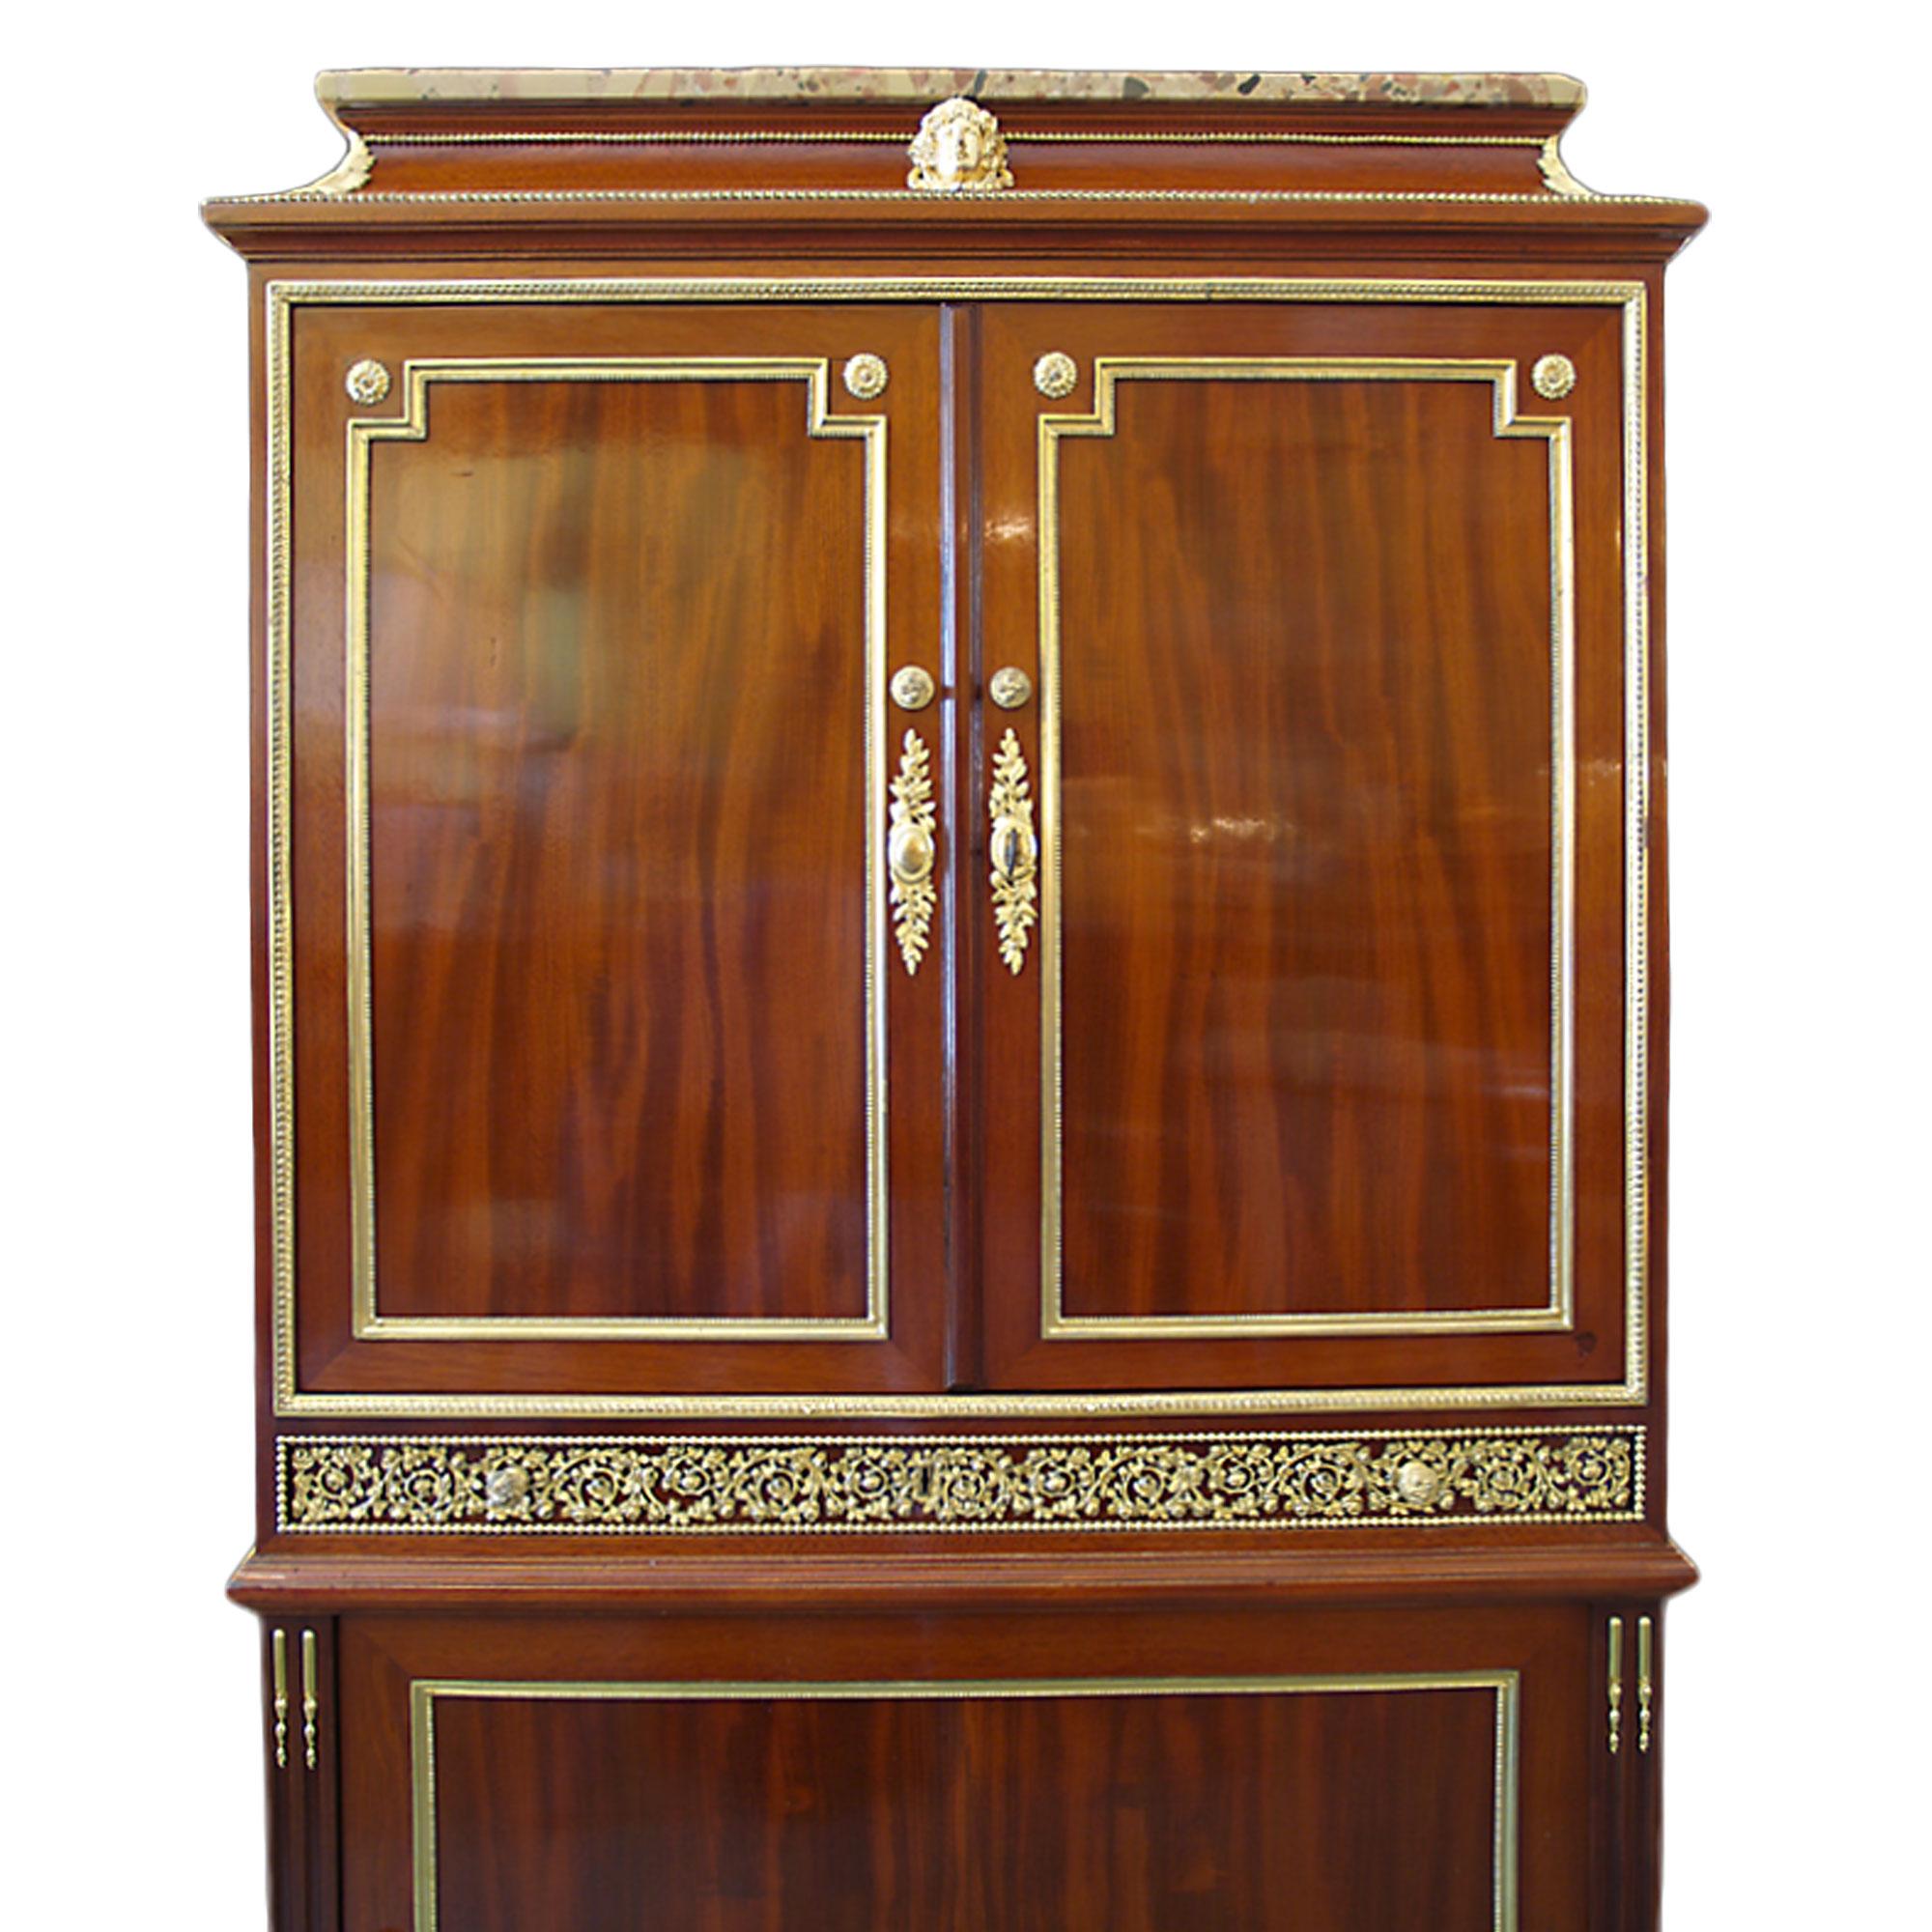 An extremely high quality French mid 19th century Louis XVI st. cabinet, signed 